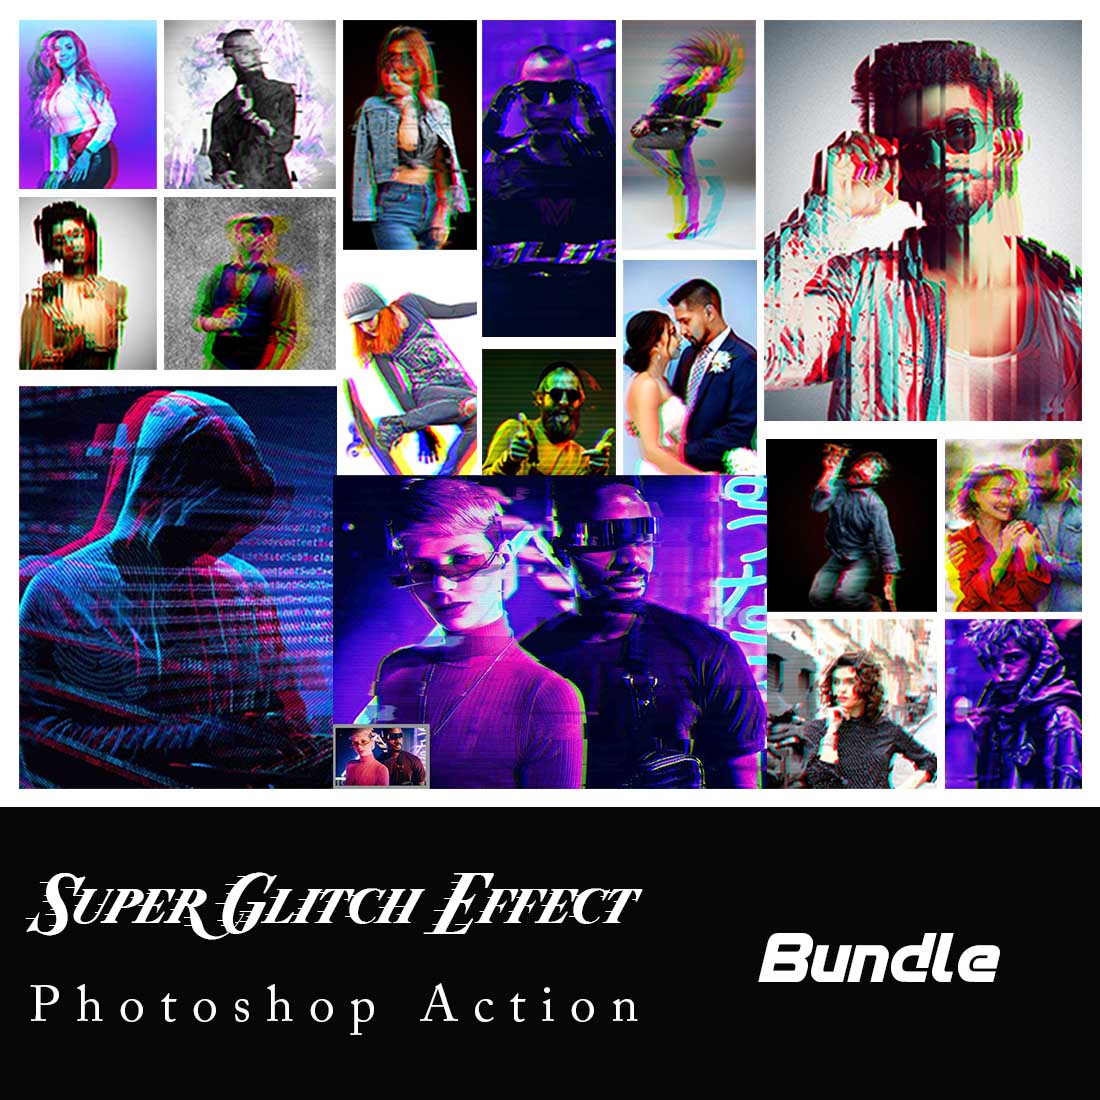 Super Glitch Effect Photoshop Action cover image.